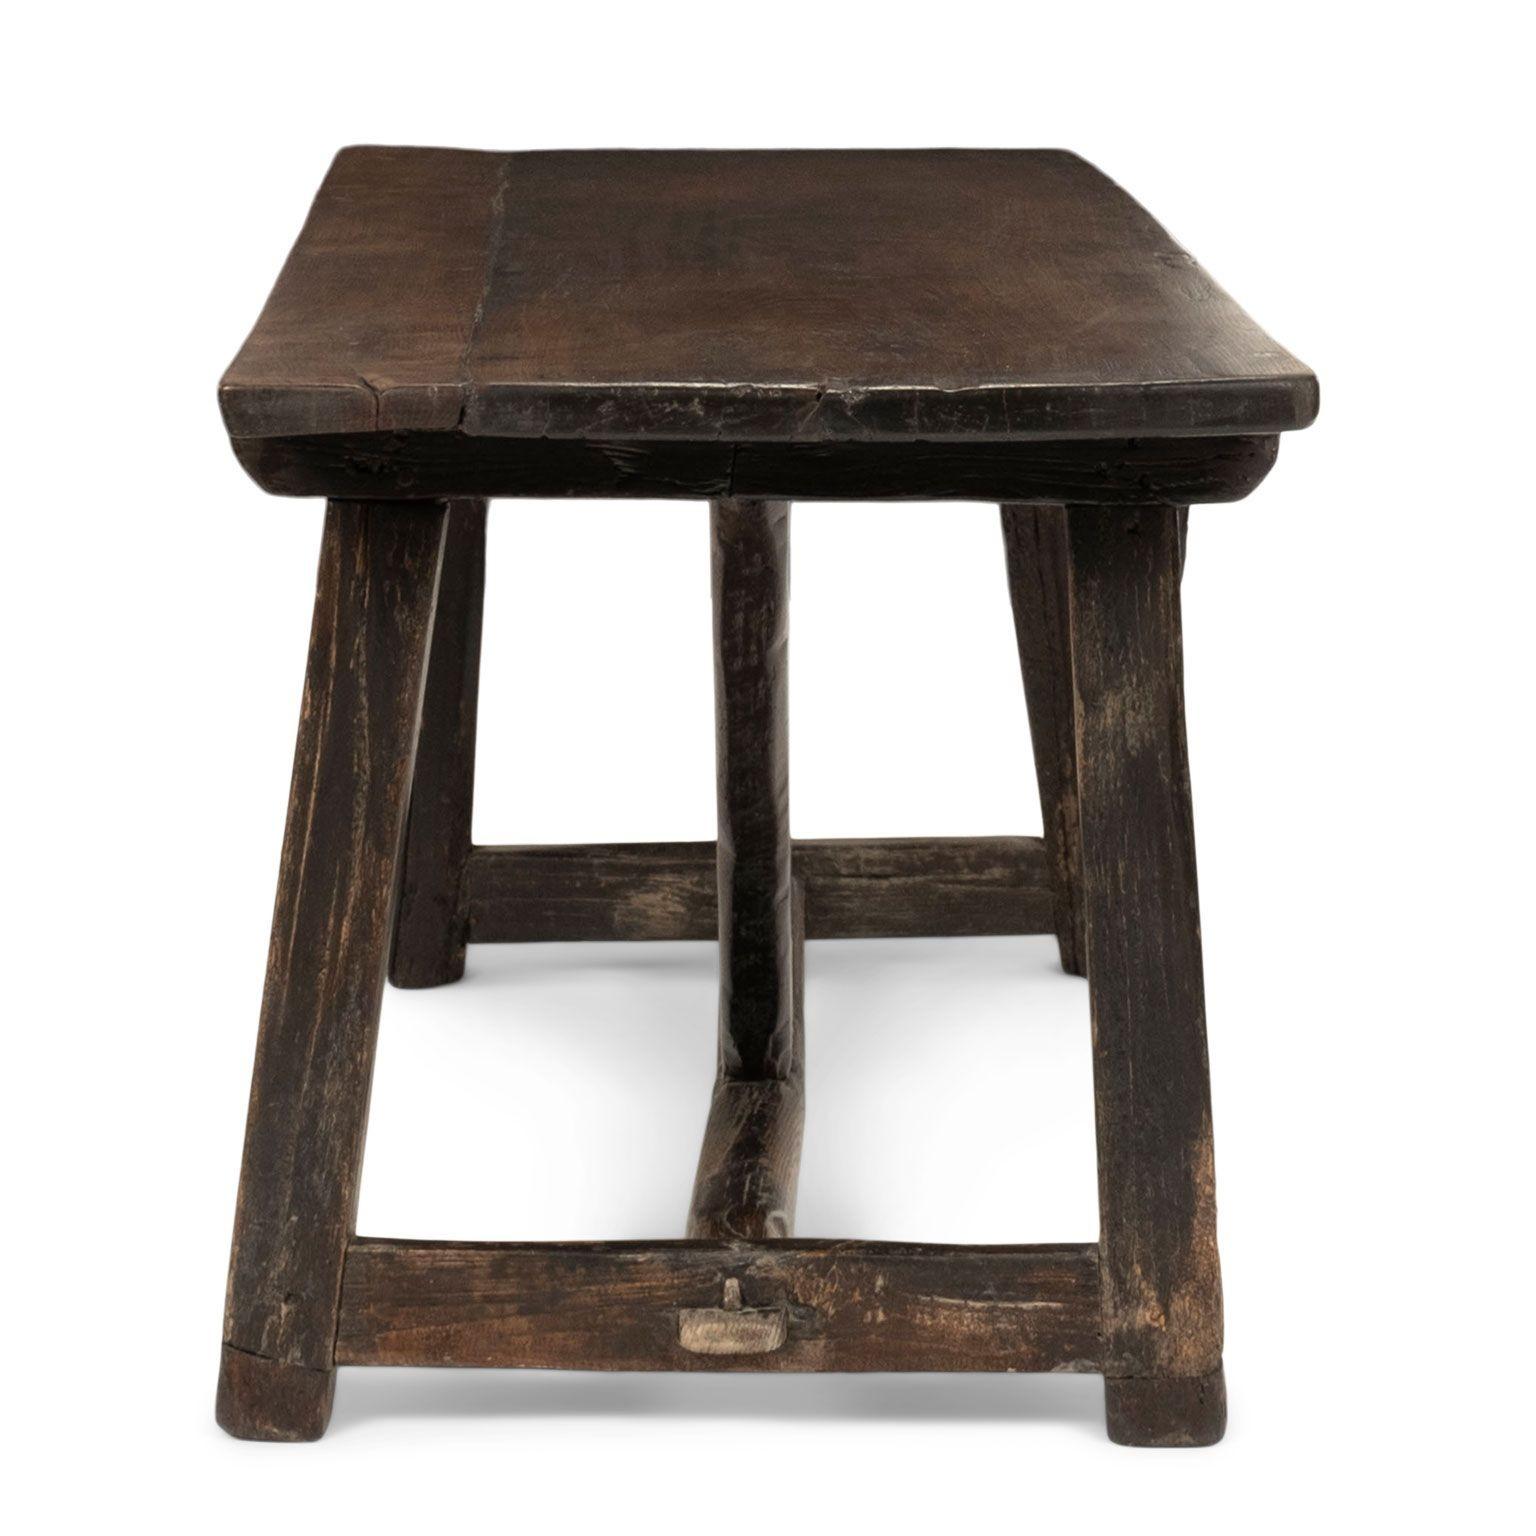 Late 17th Century Catalan Oak Console Table or Writing Desk For Sale 3